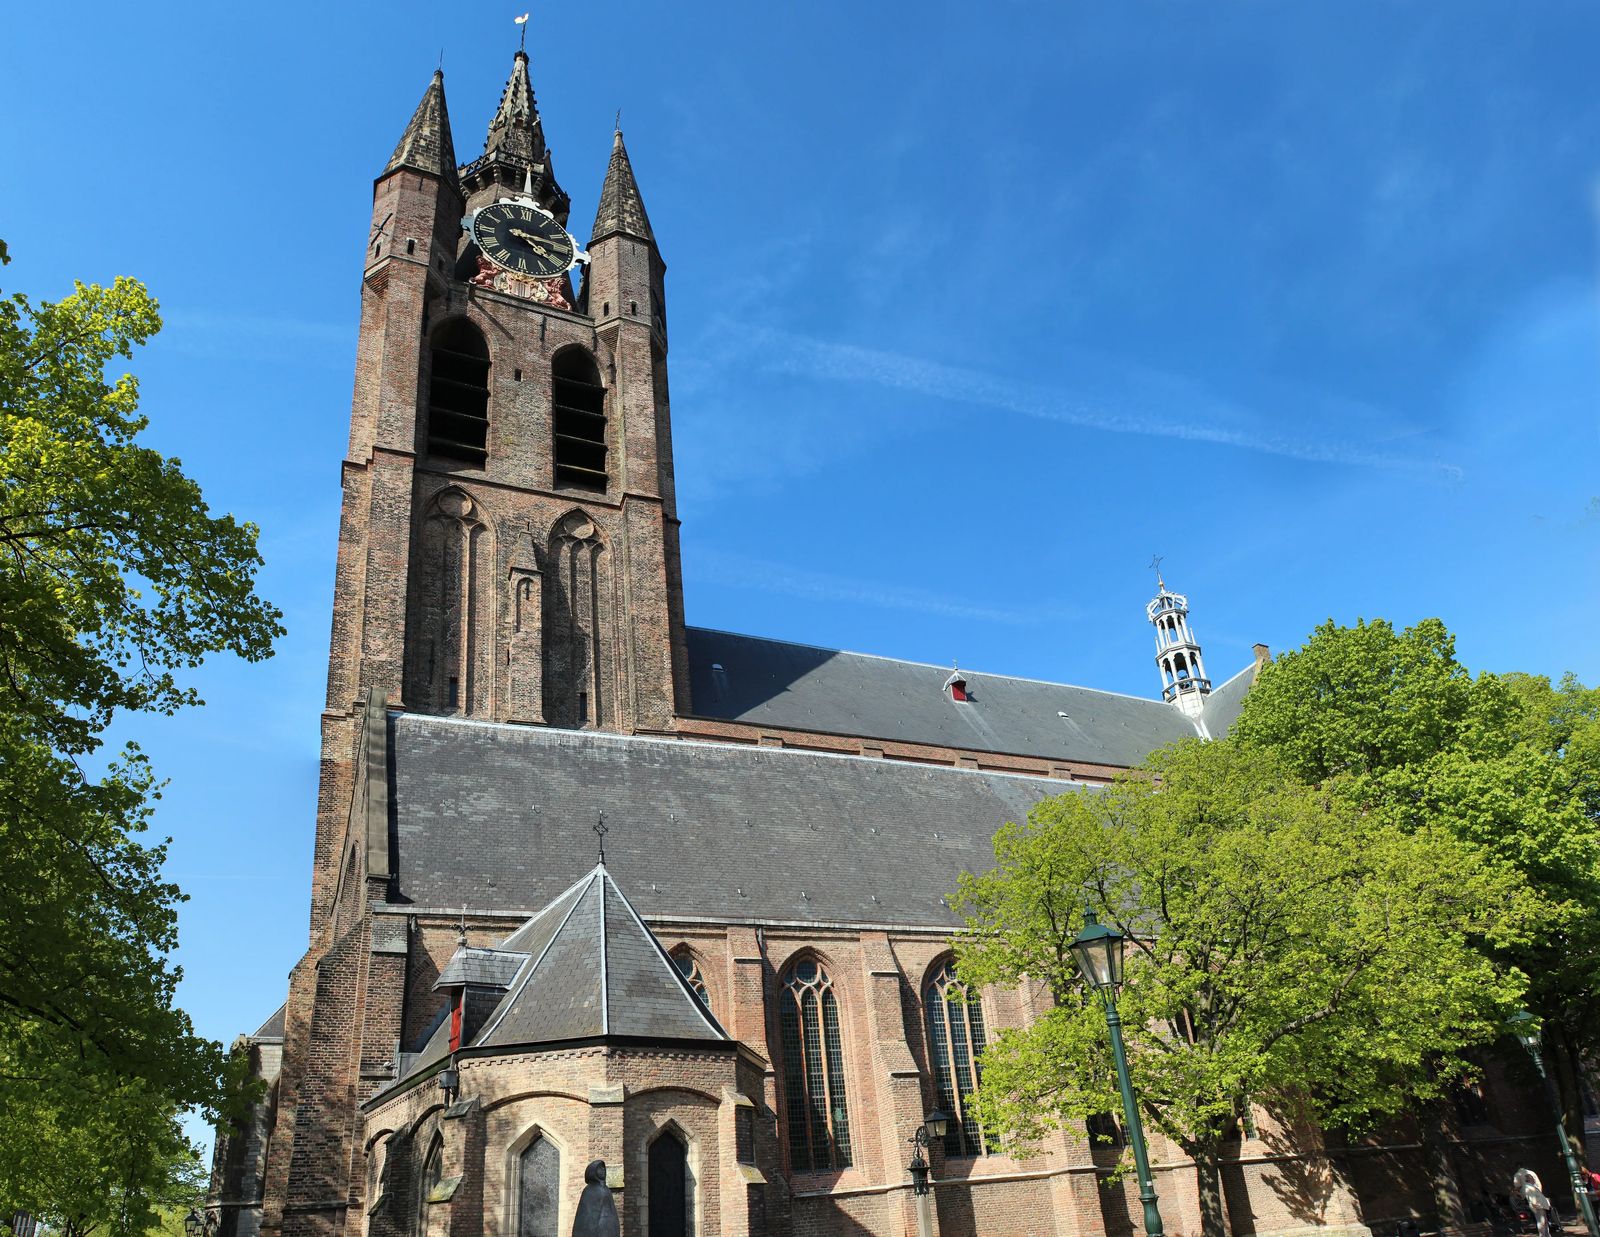 A Delft day trip from Amsterdam - Oude Kerk - the old church